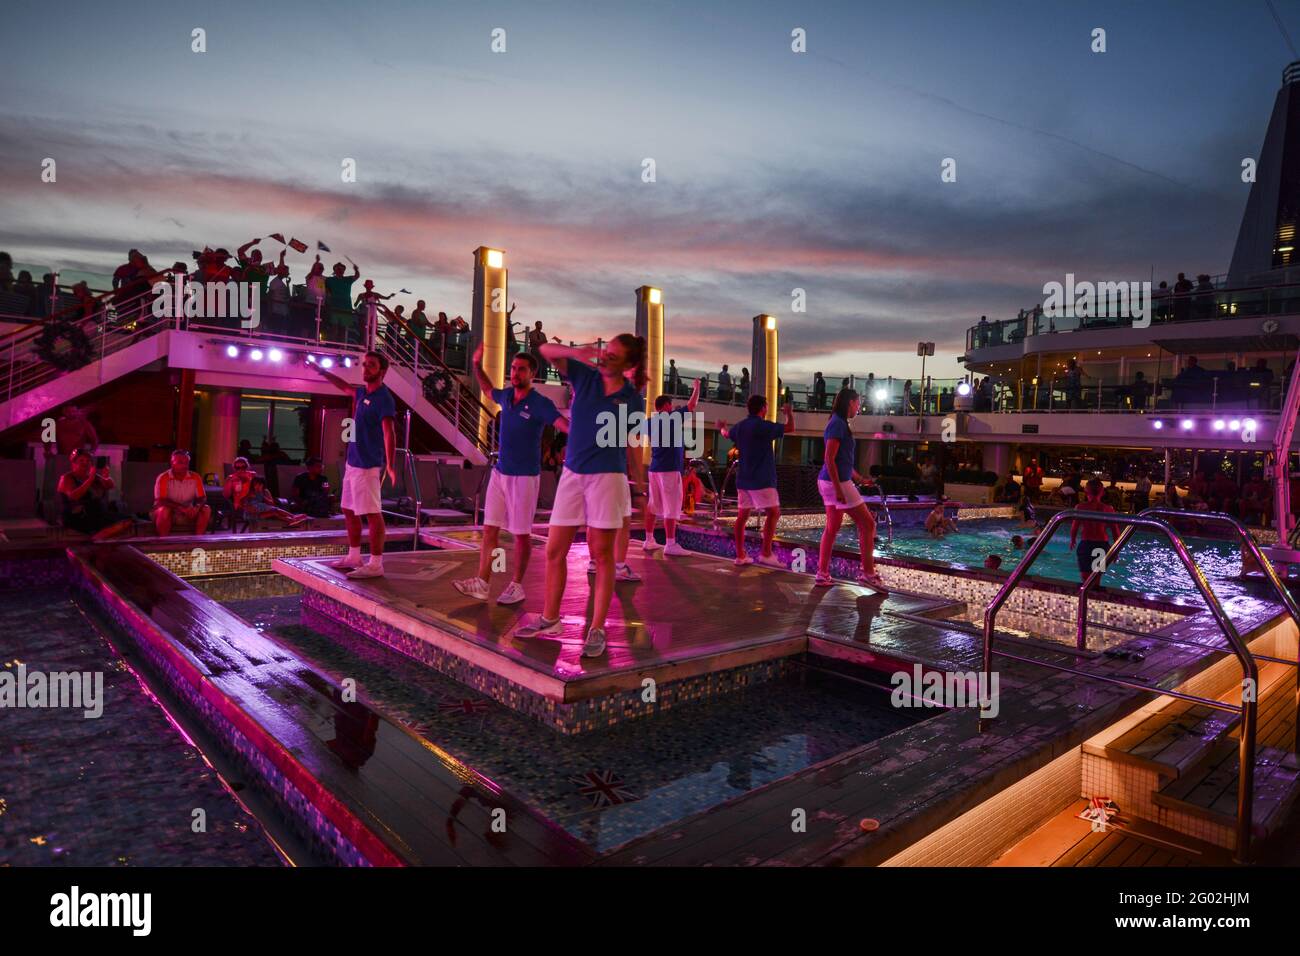 Dancers on Cruise ships Azura and Britannia twilight sky pink singing dancing on a stage in shorts swimming pool entertainers entertainment pool water Stock Photo